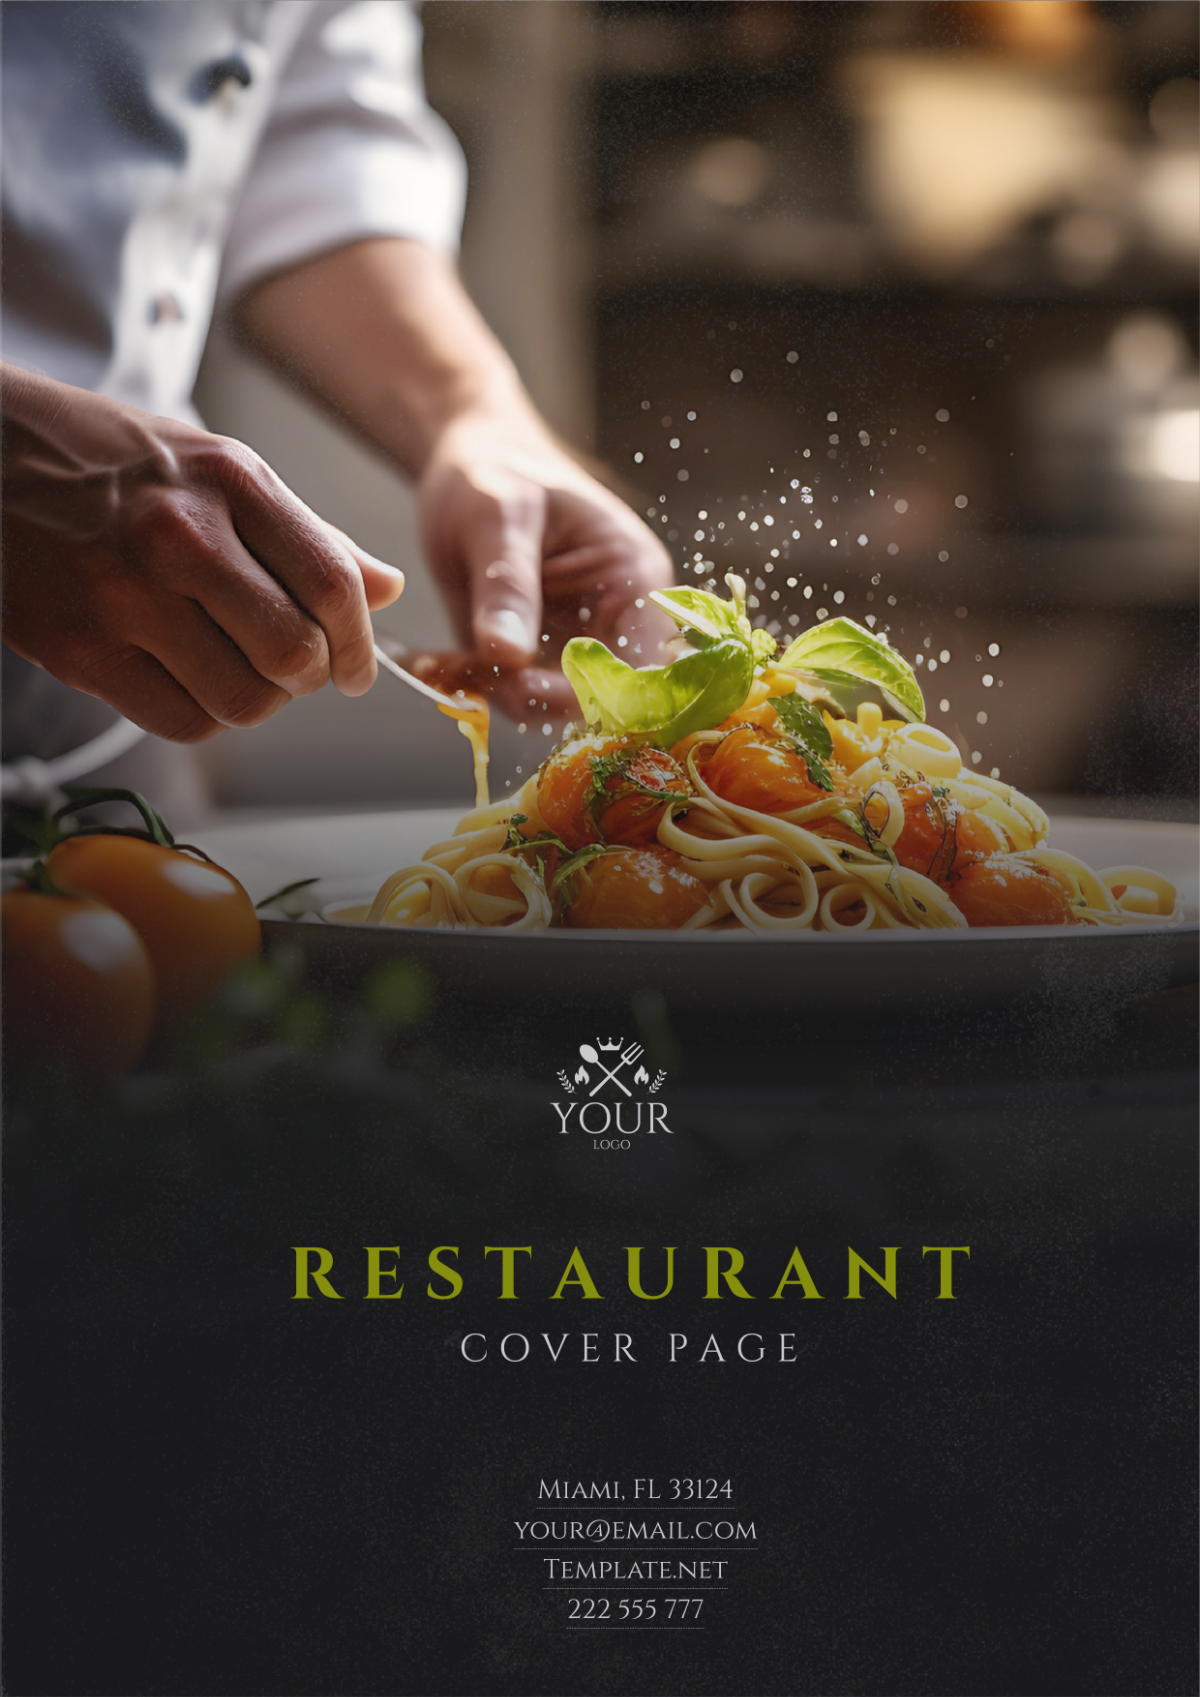 Restaurant Business Cover Page Template